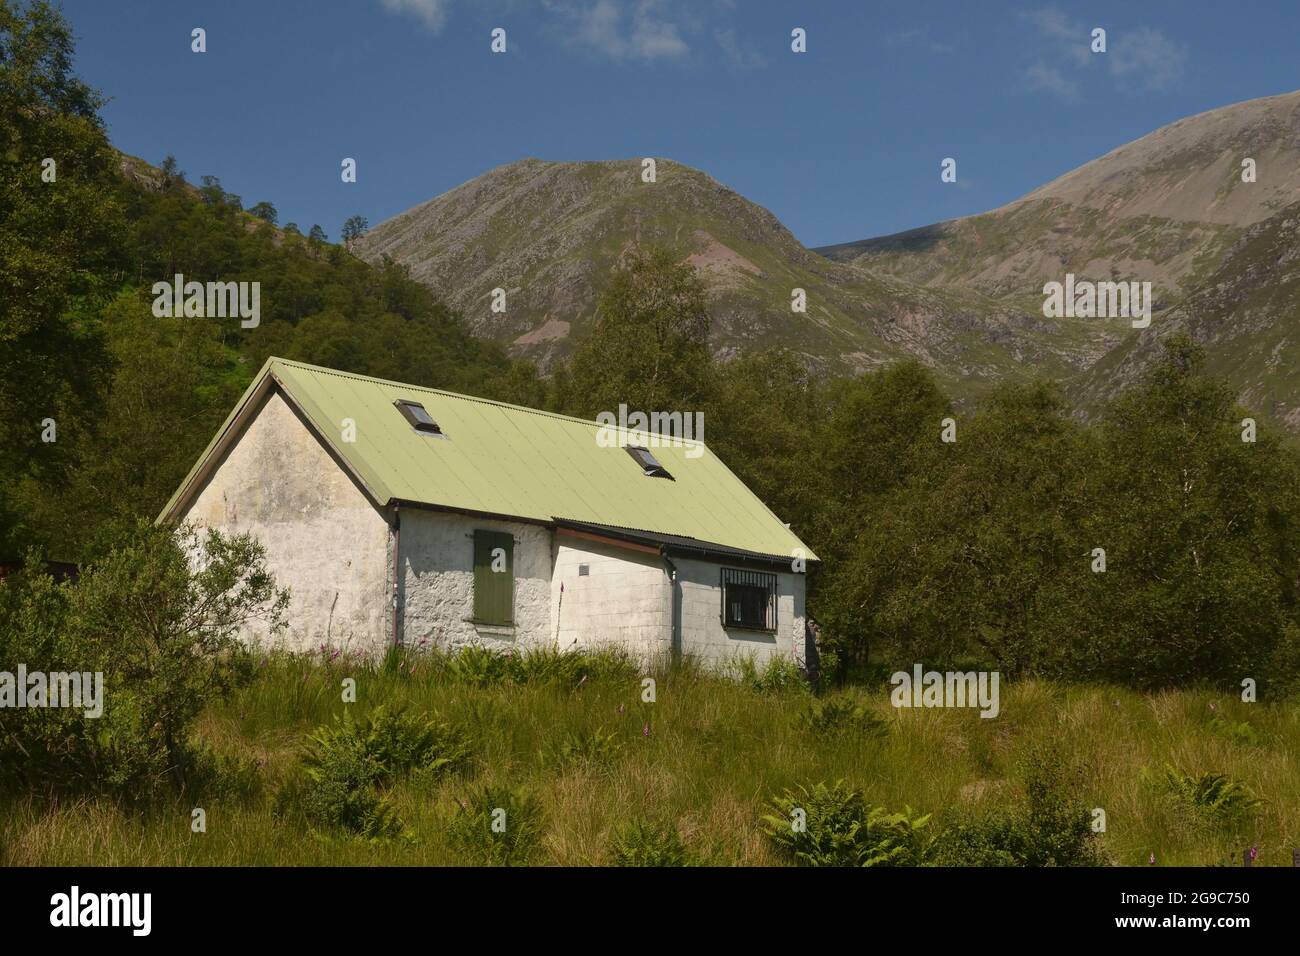 Steall Hut, a bothy in Glen Nevis, Scottish Highlands.  In Great Britain, a small mountain hut such as this is known as a bothy. Stock Photo